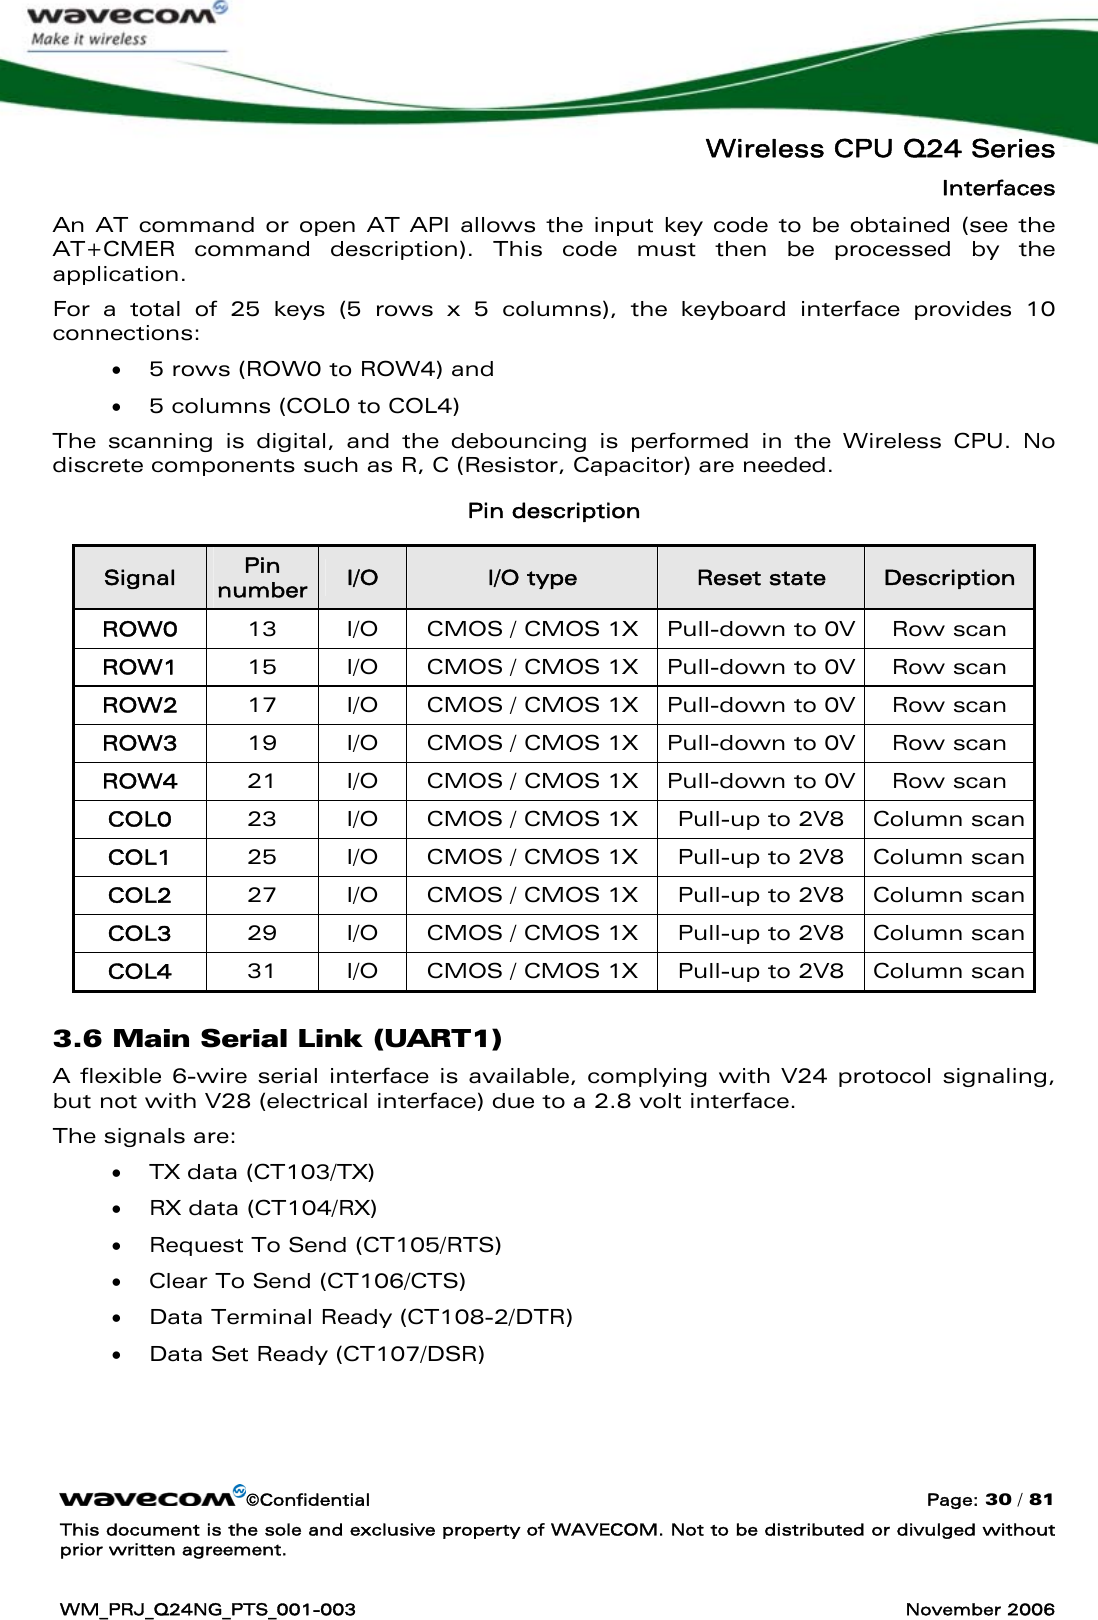   Wireless CPU Q24 Series Interfaces ©Confidential  Page: 30 / 81 This document is the sole and exclusive property of WAVECOM. Not to be distributed or divulged without prior written agreement.  WM_PRJ_Q24NG_PTS_001-003  November 2006  An AT command or open AT API allows the input key code to be obtained (see the AT+CMER command description). This code must then be processed by the application. For a total of 25 keys (5 rows x 5 columns), the keyboard interface provides 10 connections: • 5 rows (ROW0 to ROW4) and • 5 columns (COL0 to COL4) The scanning is digital, and the debouncing is performed in the Wireless CPU. No discrete components such as R, C (Resistor, Capacitor) are needed. Pin description Signal  Pin number I/O  I/O type  Reset state  Description ROW0  13  I/O  CMOS / CMOS 1X  Pull-down to 0V  Row scan ROW1  15  I/O  CMOS / CMOS 1X  Pull-down to 0V  Row scan ROW2  17  I/O  CMOS / CMOS 1X  Pull-down to 0V  Row scan ROW3  19  I/O  CMOS / CMOS 1X  Pull-down to 0V  Row scan ROW4  21  I/O  CMOS / CMOS 1X  Pull-down to 0V  Row scan COL0  23  I/O  CMOS / CMOS 1X  Pull-up to 2V8  Column scan COL1  25  I/O  CMOS / CMOS 1X  Pull-up to 2V8  Column scan COL2  27  I/O  CMOS / CMOS 1X  Pull-up to 2V8  Column scan COL3  29  I/O  CMOS / CMOS 1X  Pull-up to 2V8  Column scan COL4  31  I/O  CMOS / CMOS 1X  Pull-up to 2V8  Column scan 3.6 Main Serial Link (UART1) A flexible 6-wire serial interface is available, complying with V24 protocol signaling, but not with V28 (electrical interface) due to a 2.8 volt interface. The signals are: • TX data (CT103/TX) • RX data (CT104/RX) • Request To Send (CT105/RTS) • Clear To Send (CT106/CTS) • Data Terminal Ready (CT108-2/DTR) • Data Set Ready (CT107/DSR) 